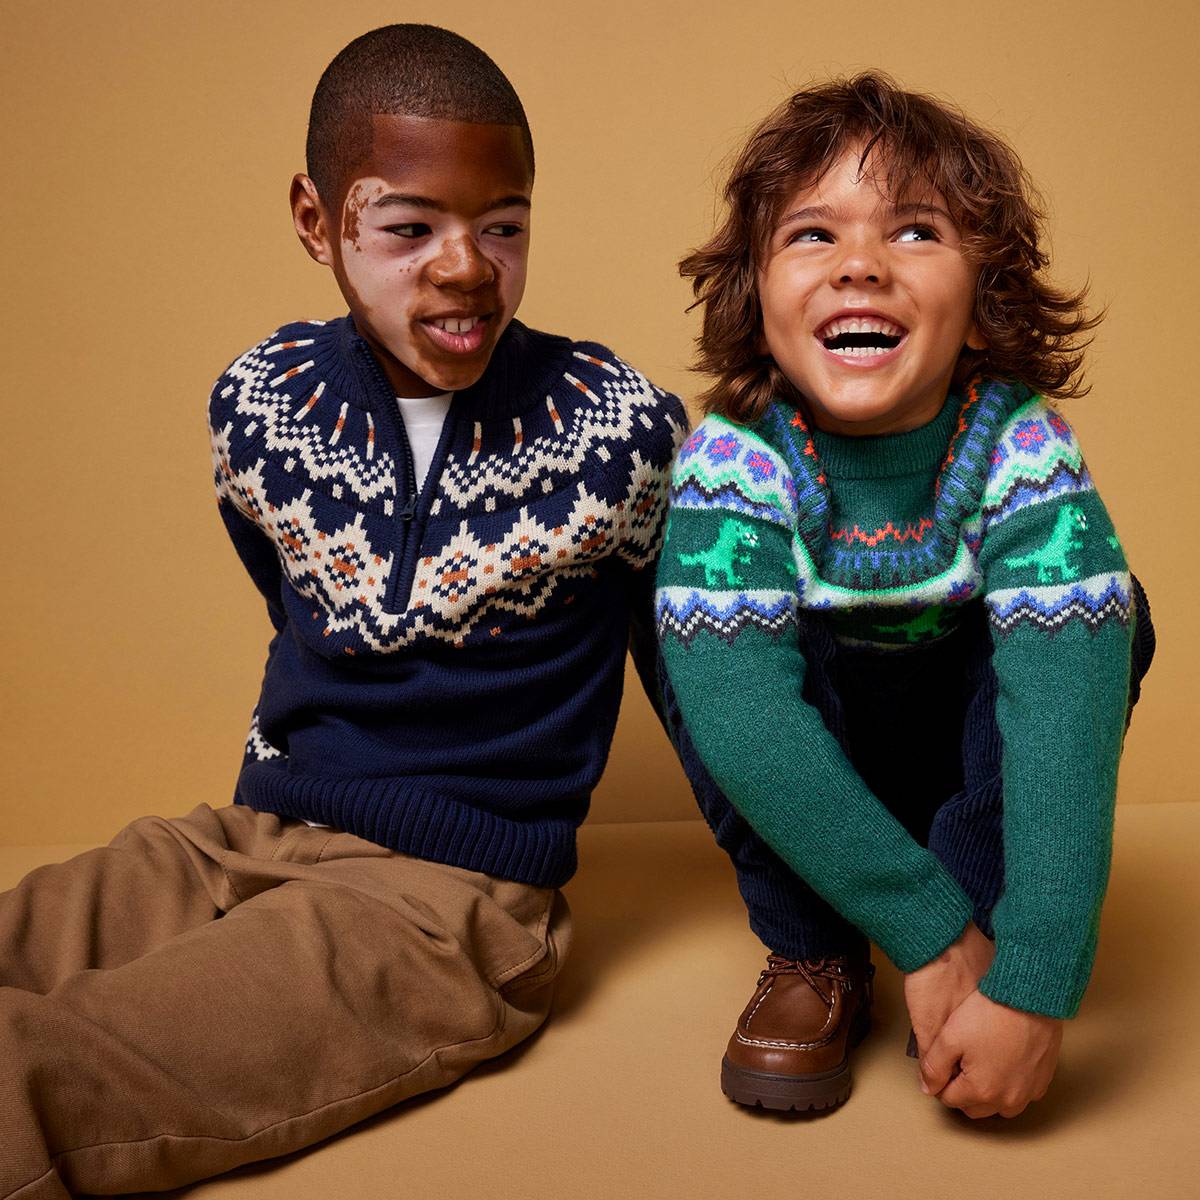 Boys wearing Christmas jumpers. Shop Christmas jumpers